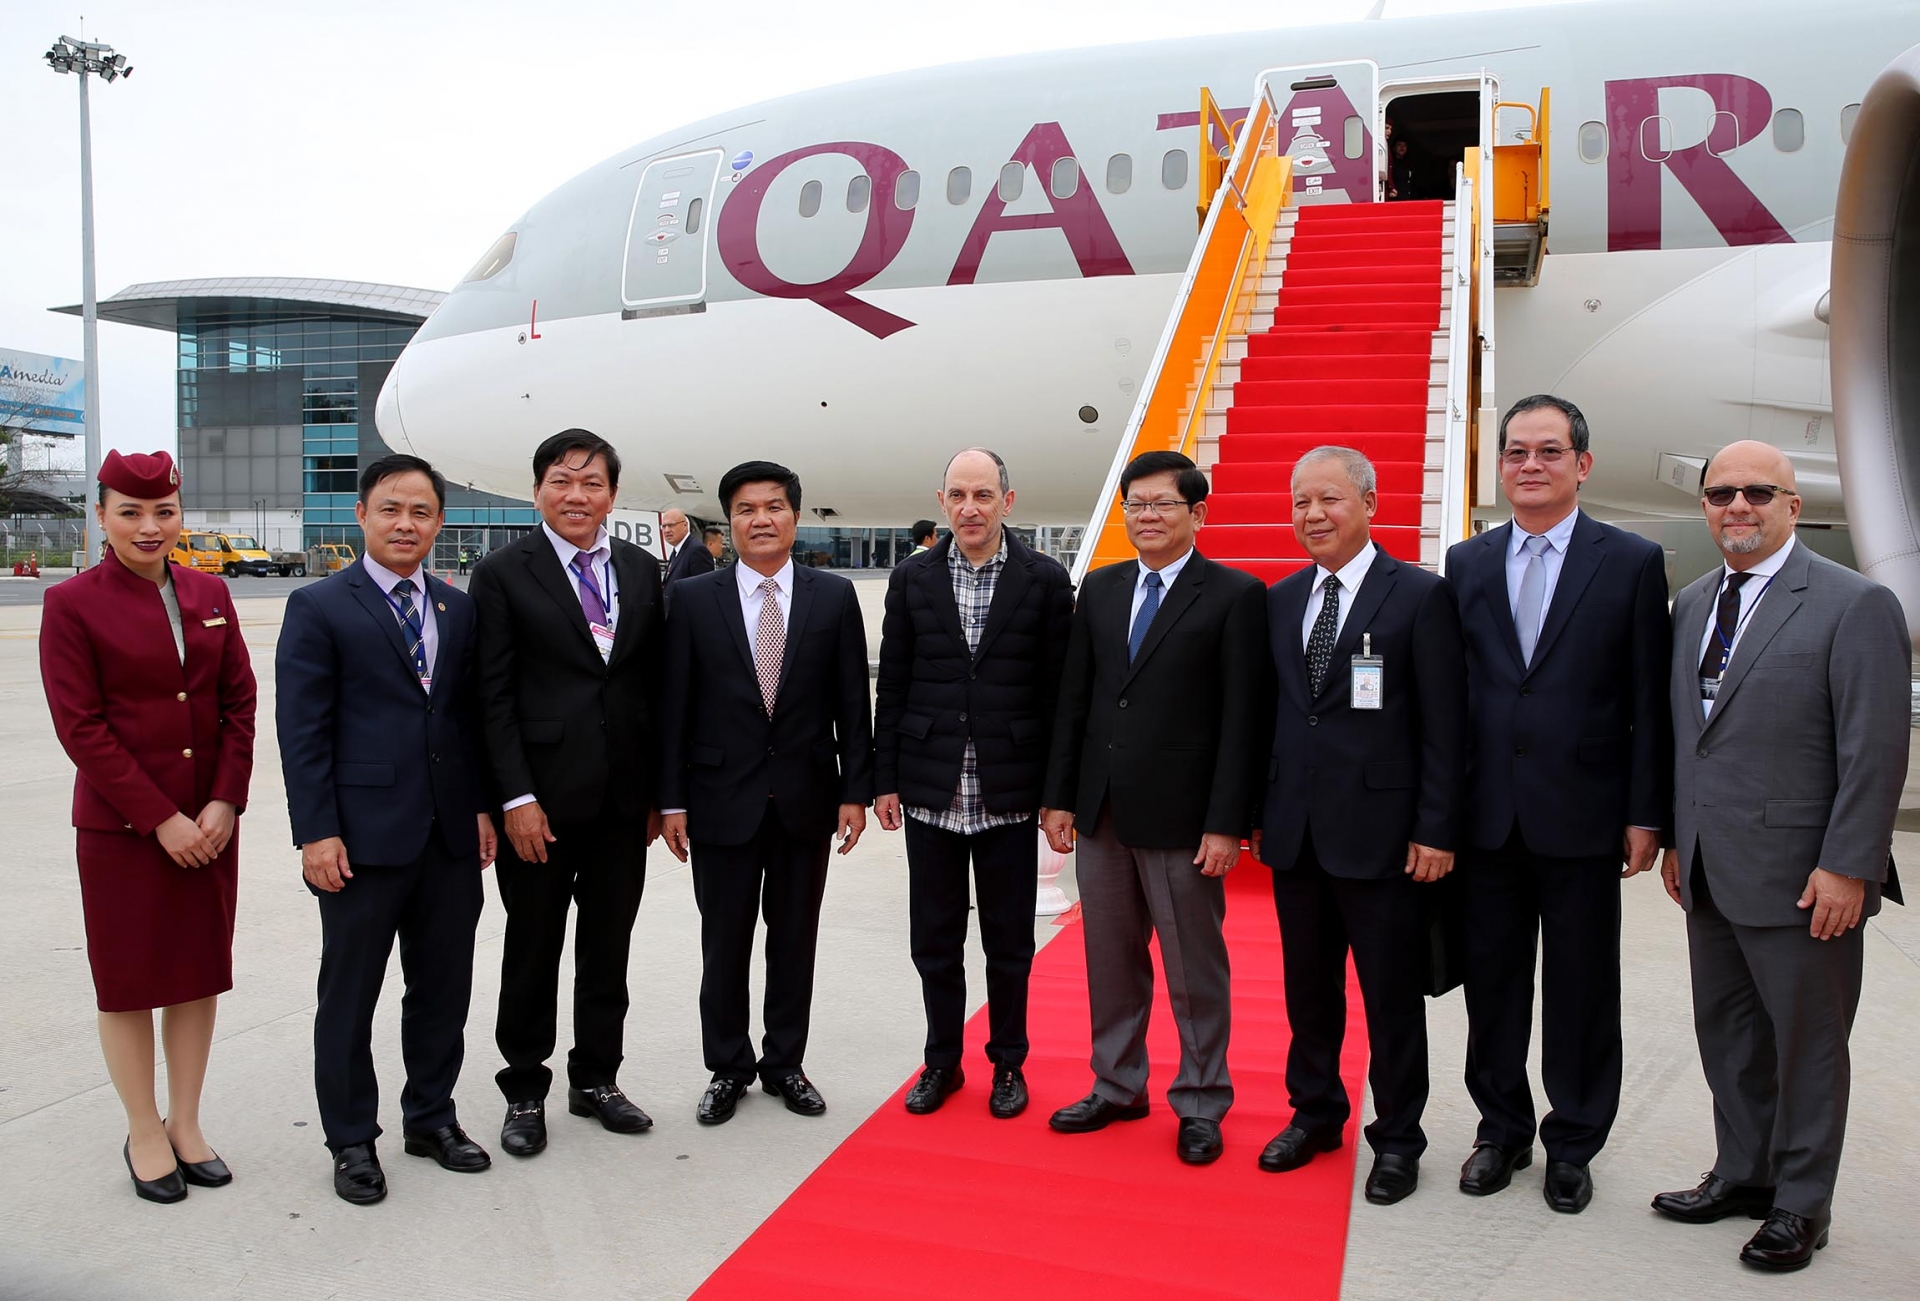 Qatar Airways breaks into Central Vietnam with new route to Danang